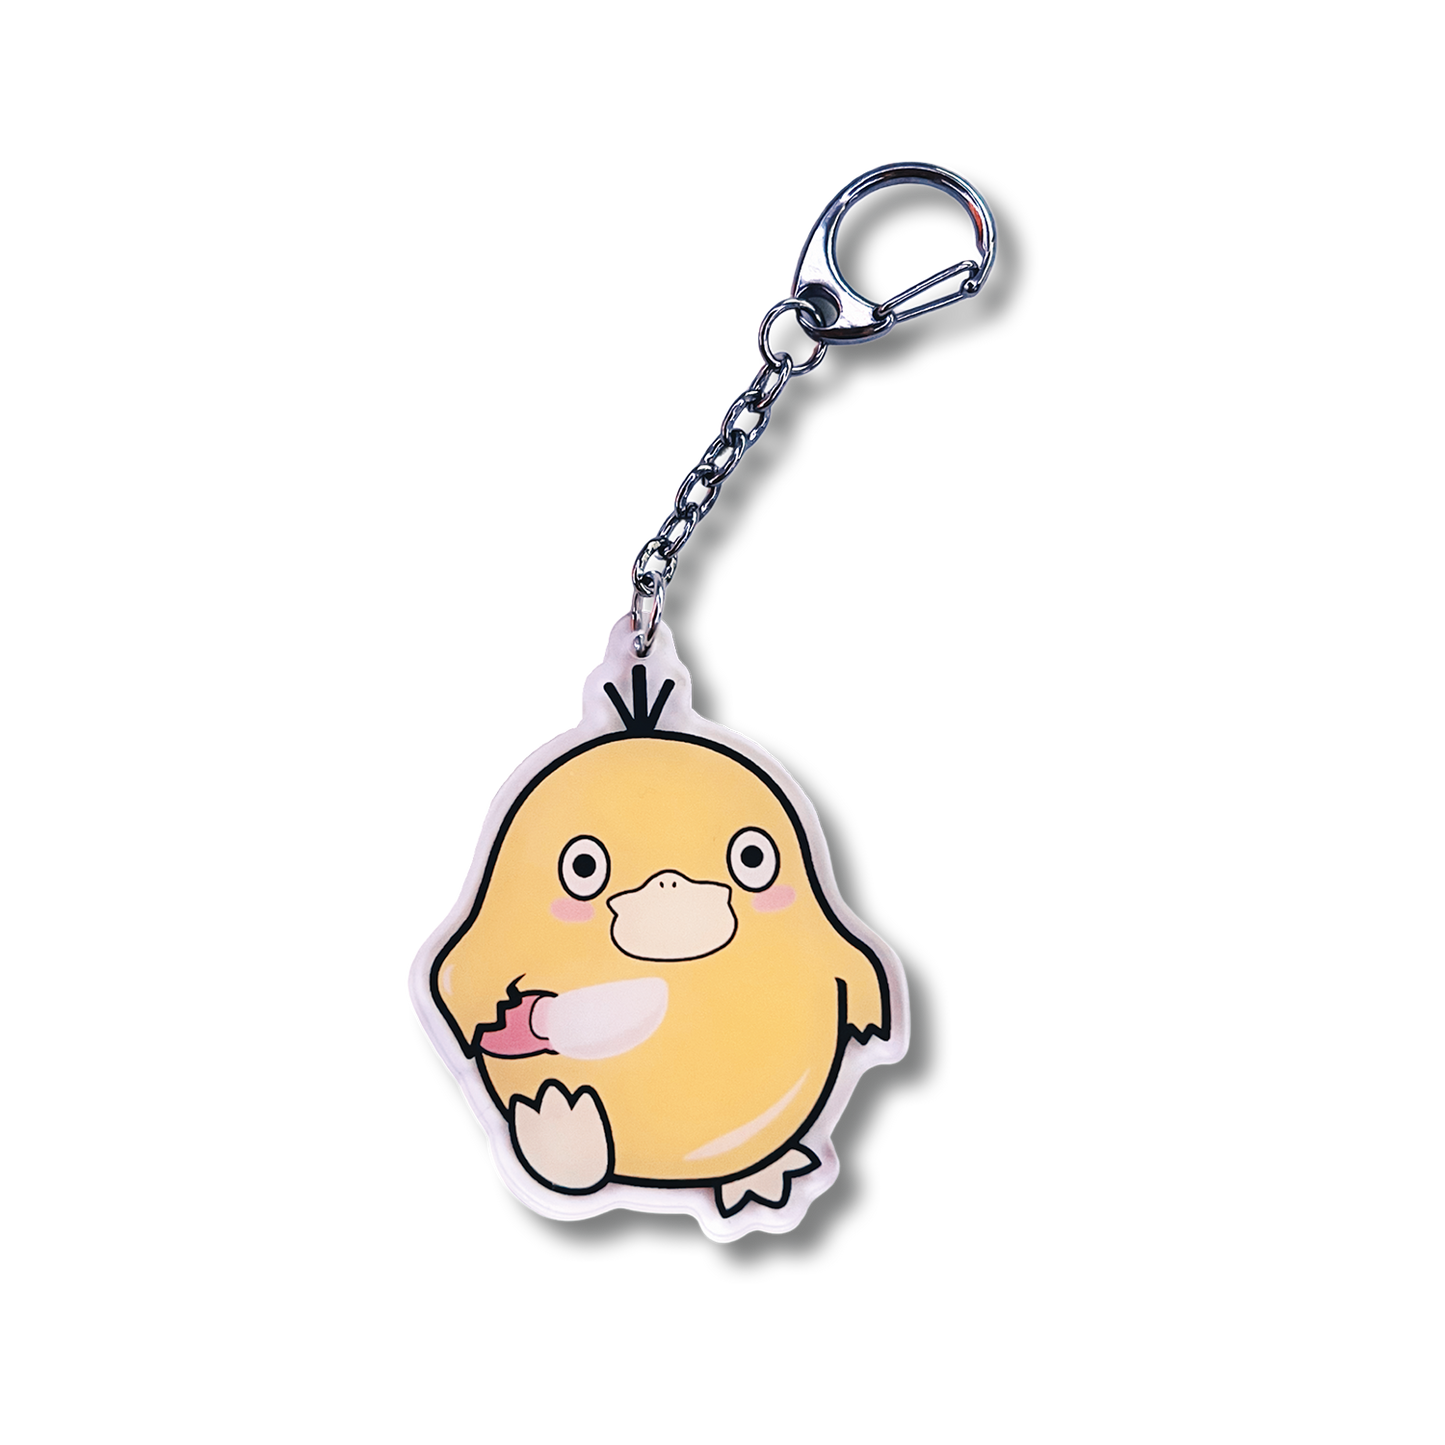 Psyduck with Knife Keychain design includes Pokemon Psyduck holding a knife on an acrylic keychain.